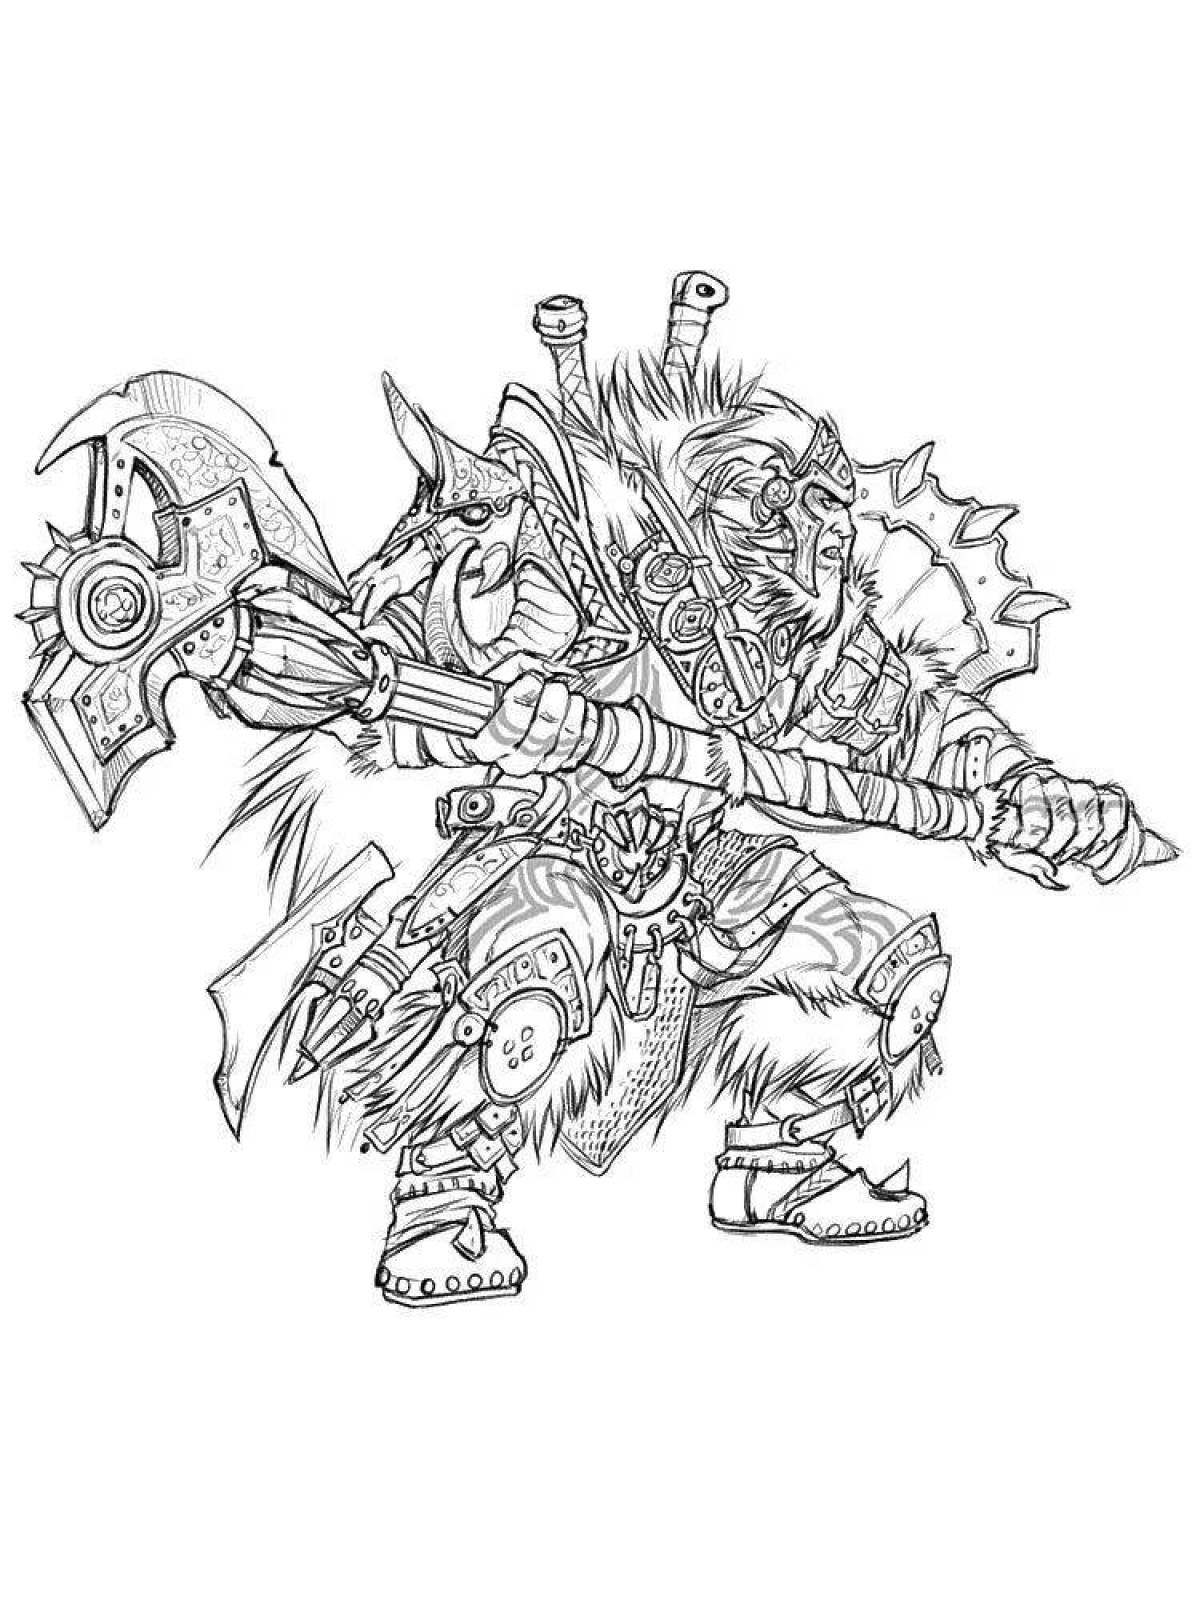 Fabulous world of warcraft coloring page